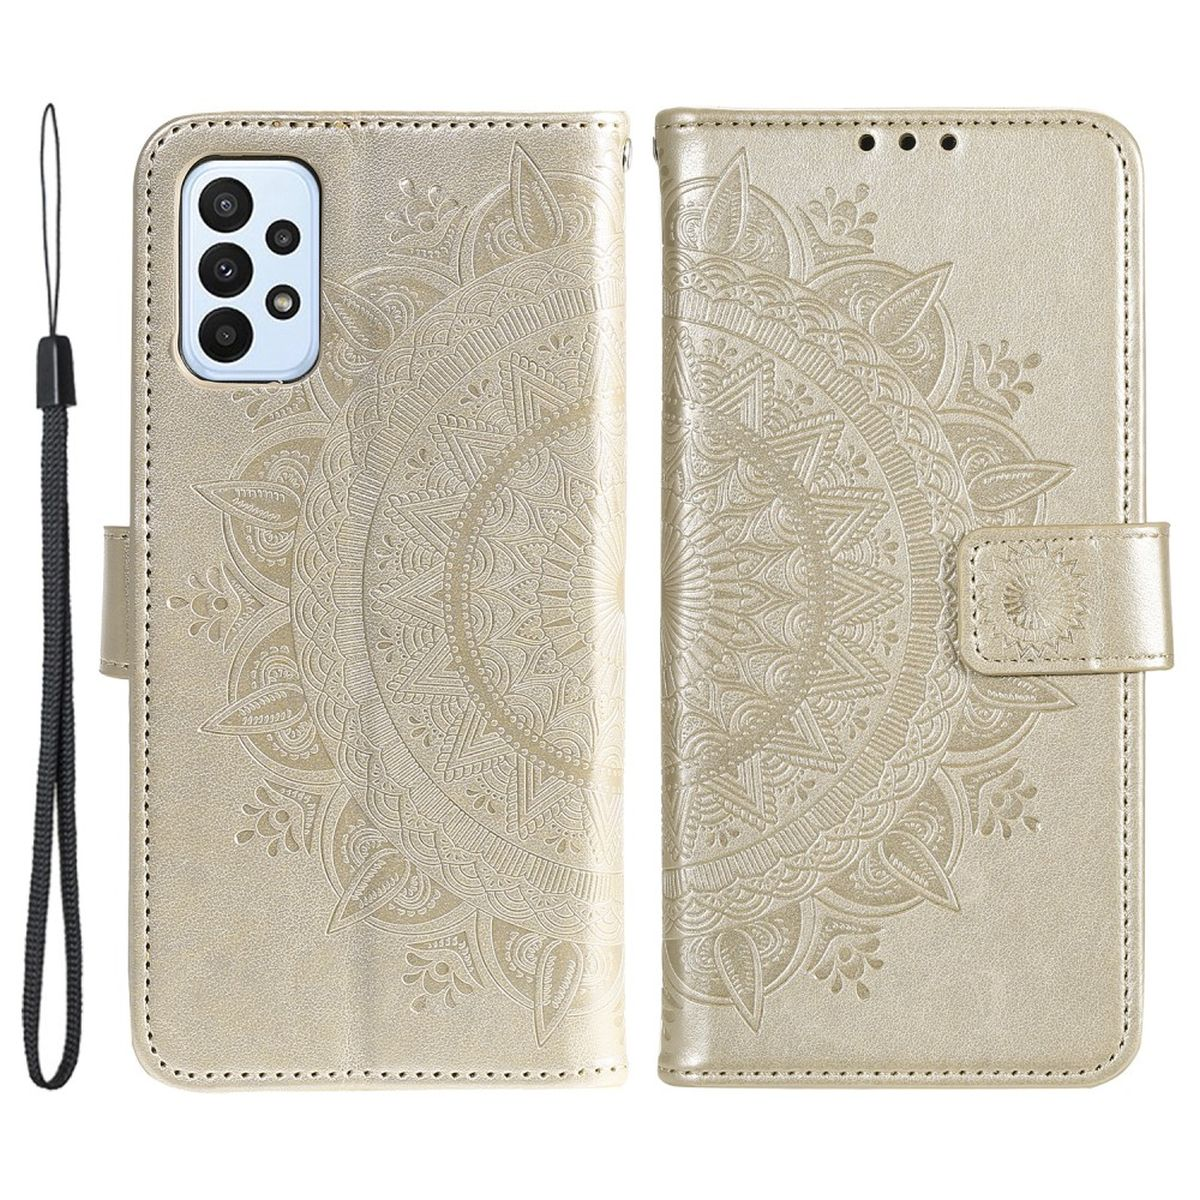 COVERKINGZ Klapphülle mit Muster, Gold Bookcover, A23, Mandala Samsung, Galaxy